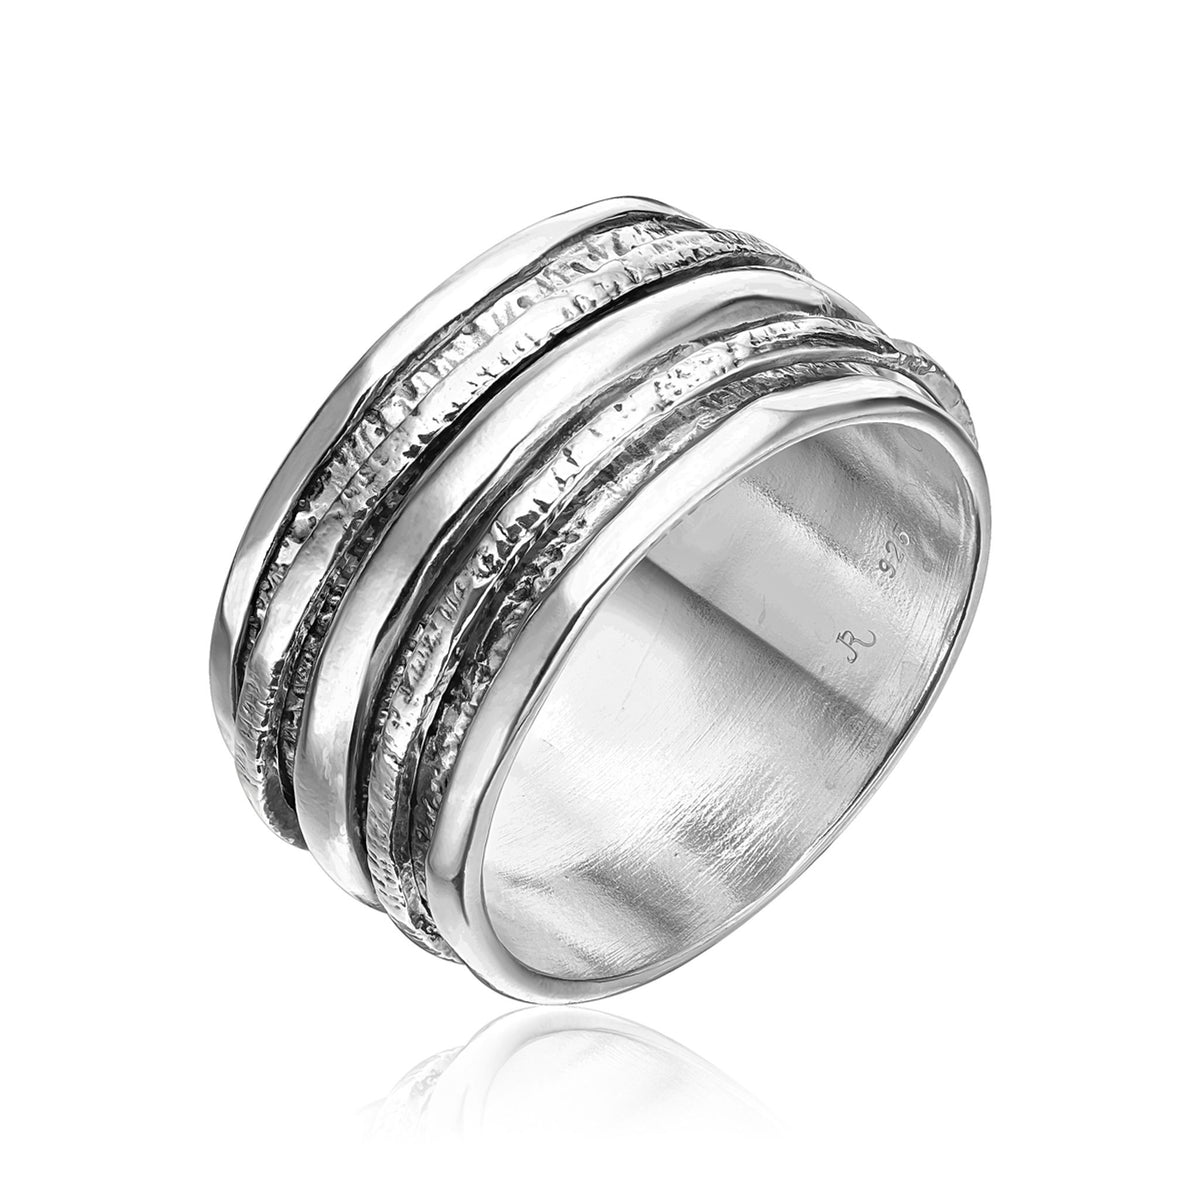 Vintage Style Sterling Silver Spinner Rings - Chronicle Collectibles